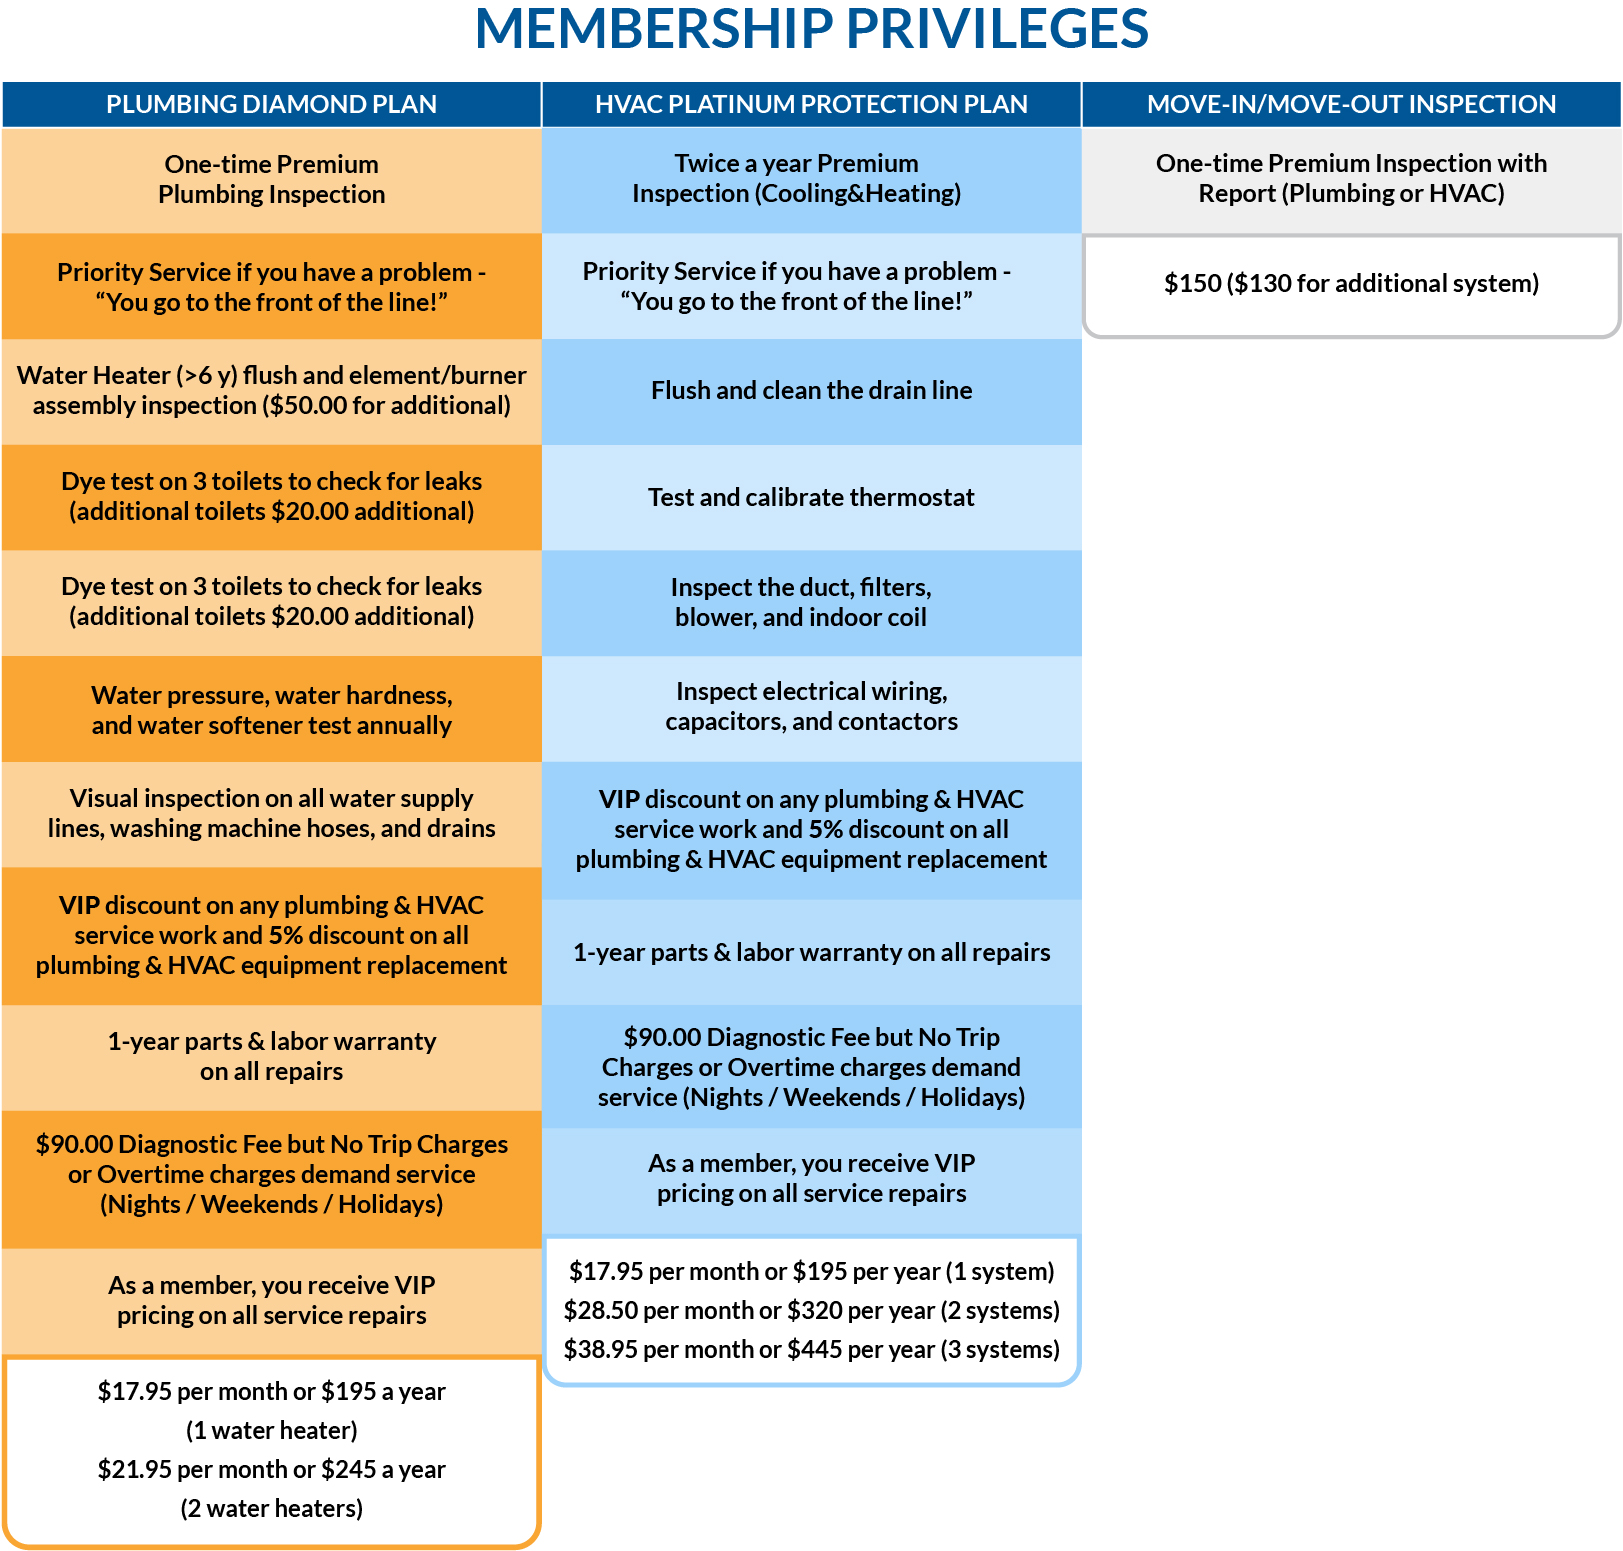 Freund infographic about membership privileges